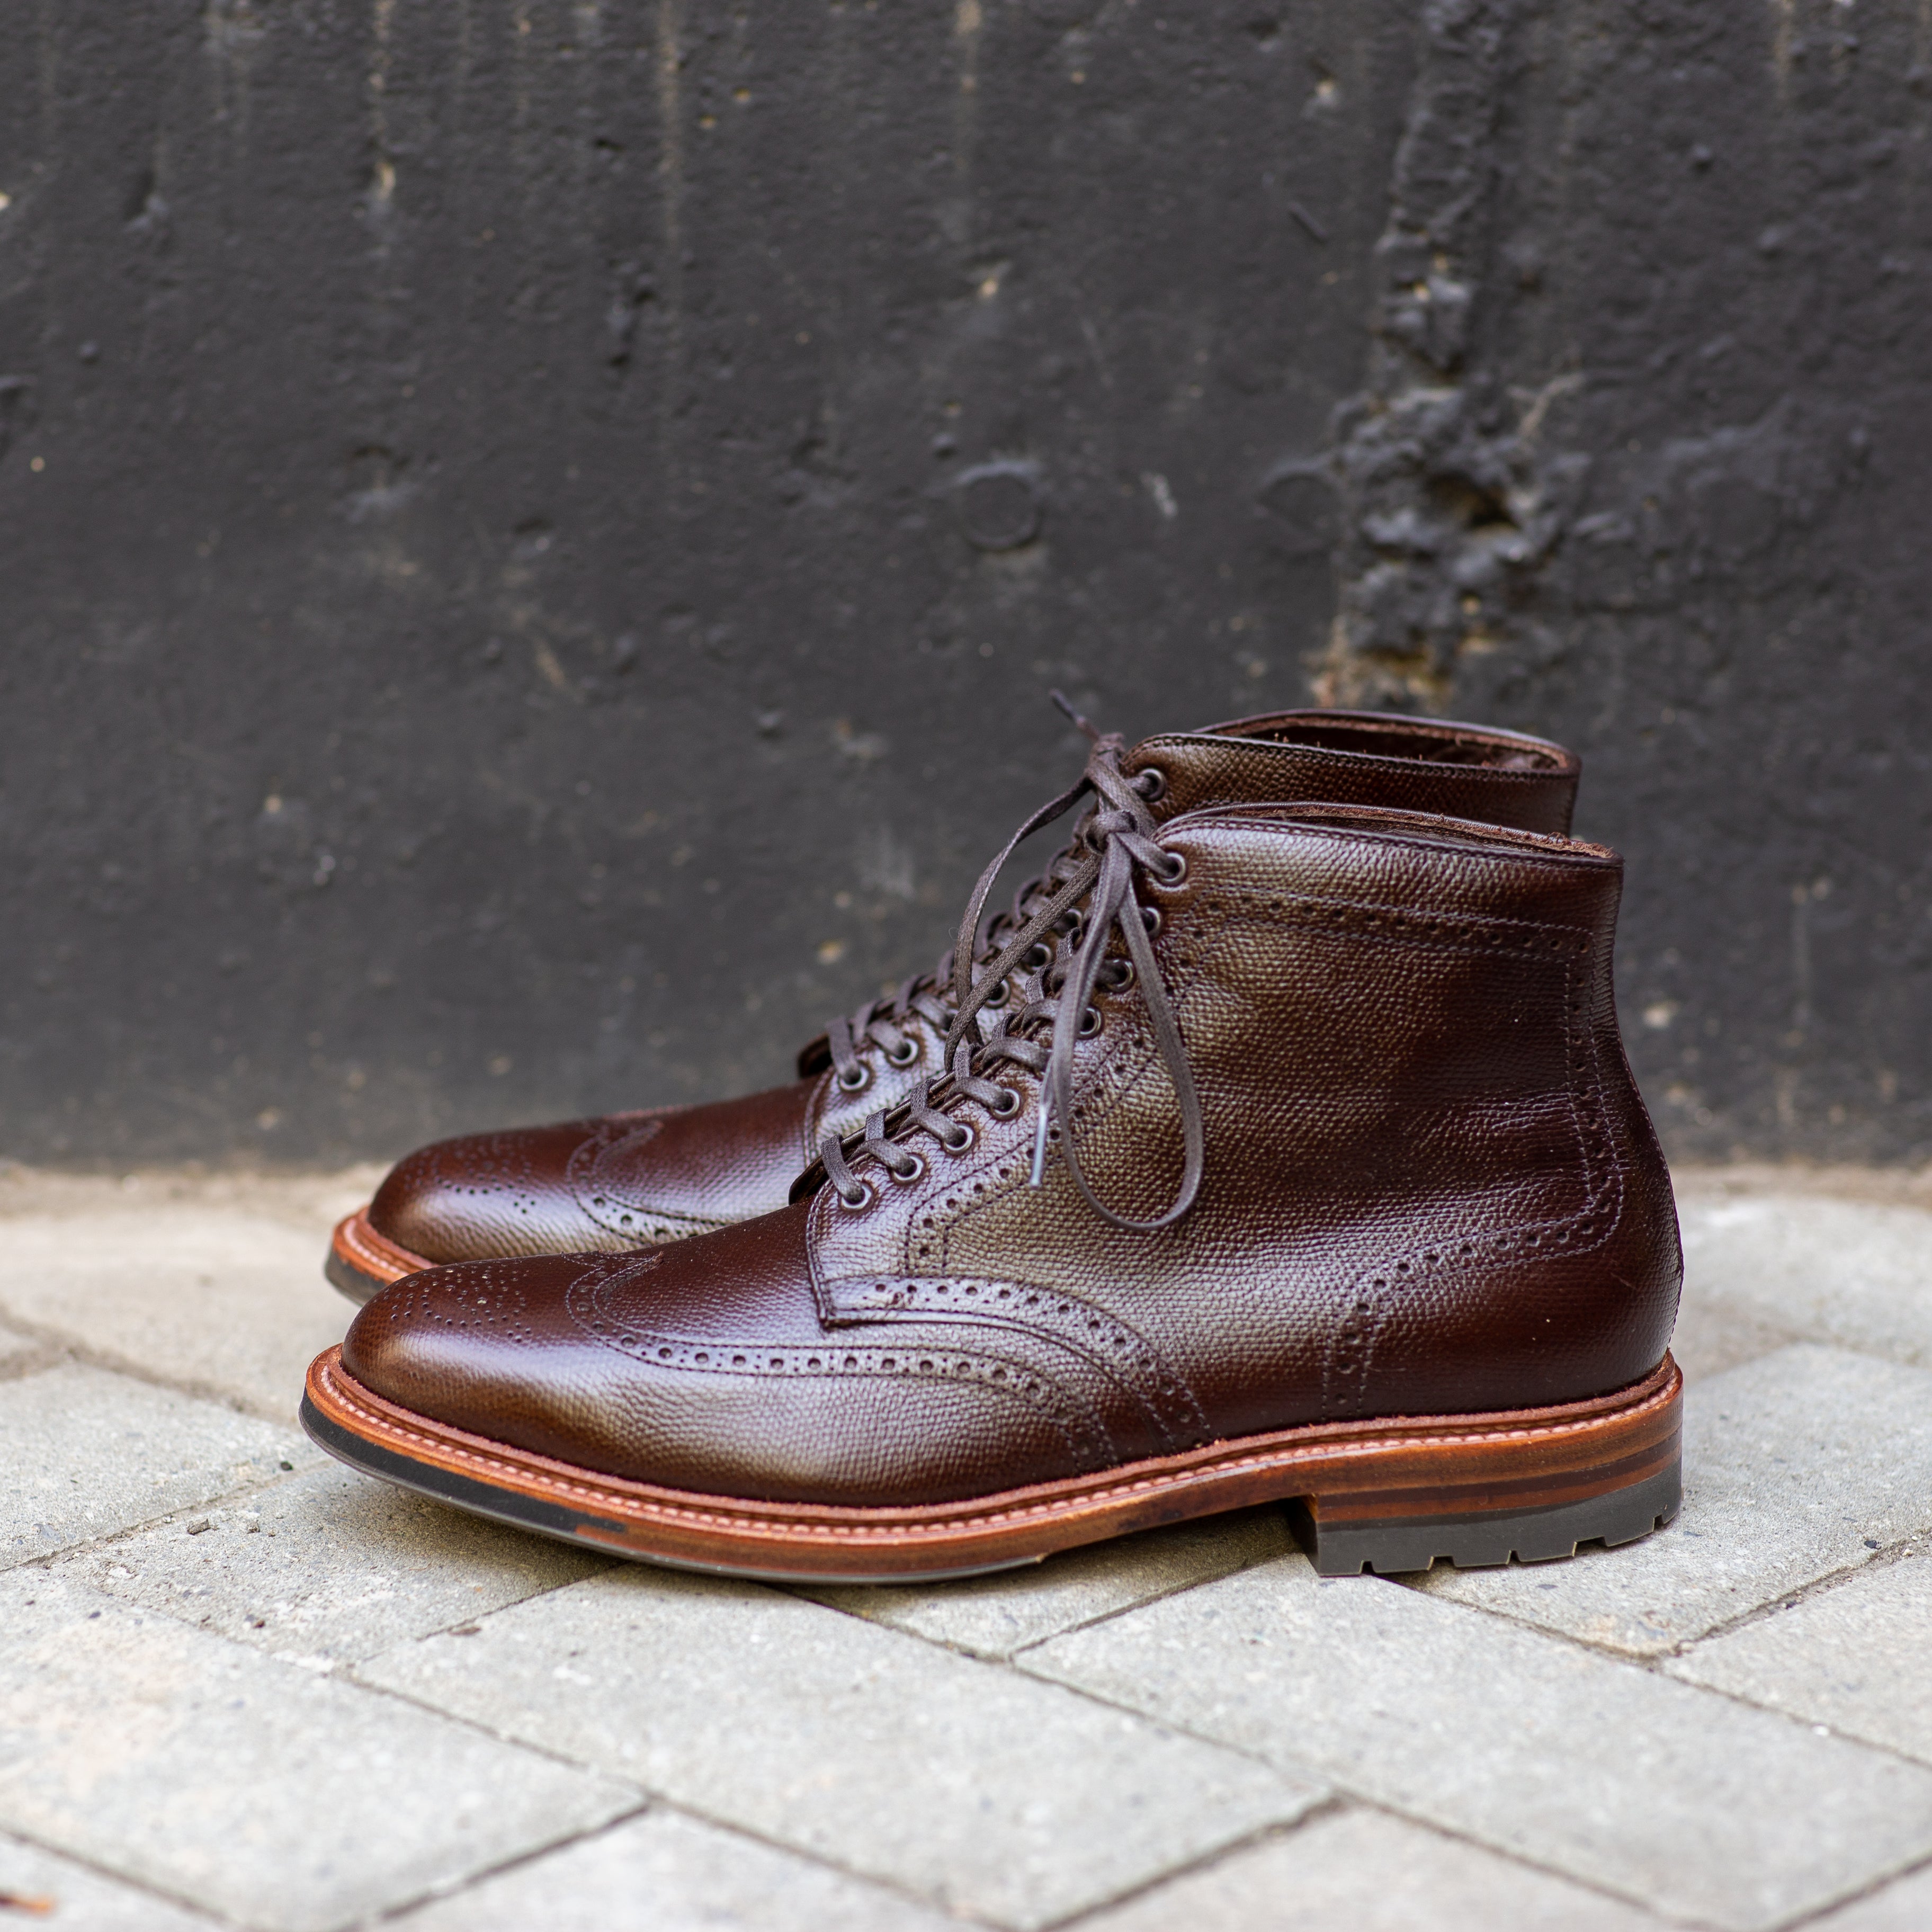 Alden x Brogue Wing Tip Boot – Patina Turner's Boots